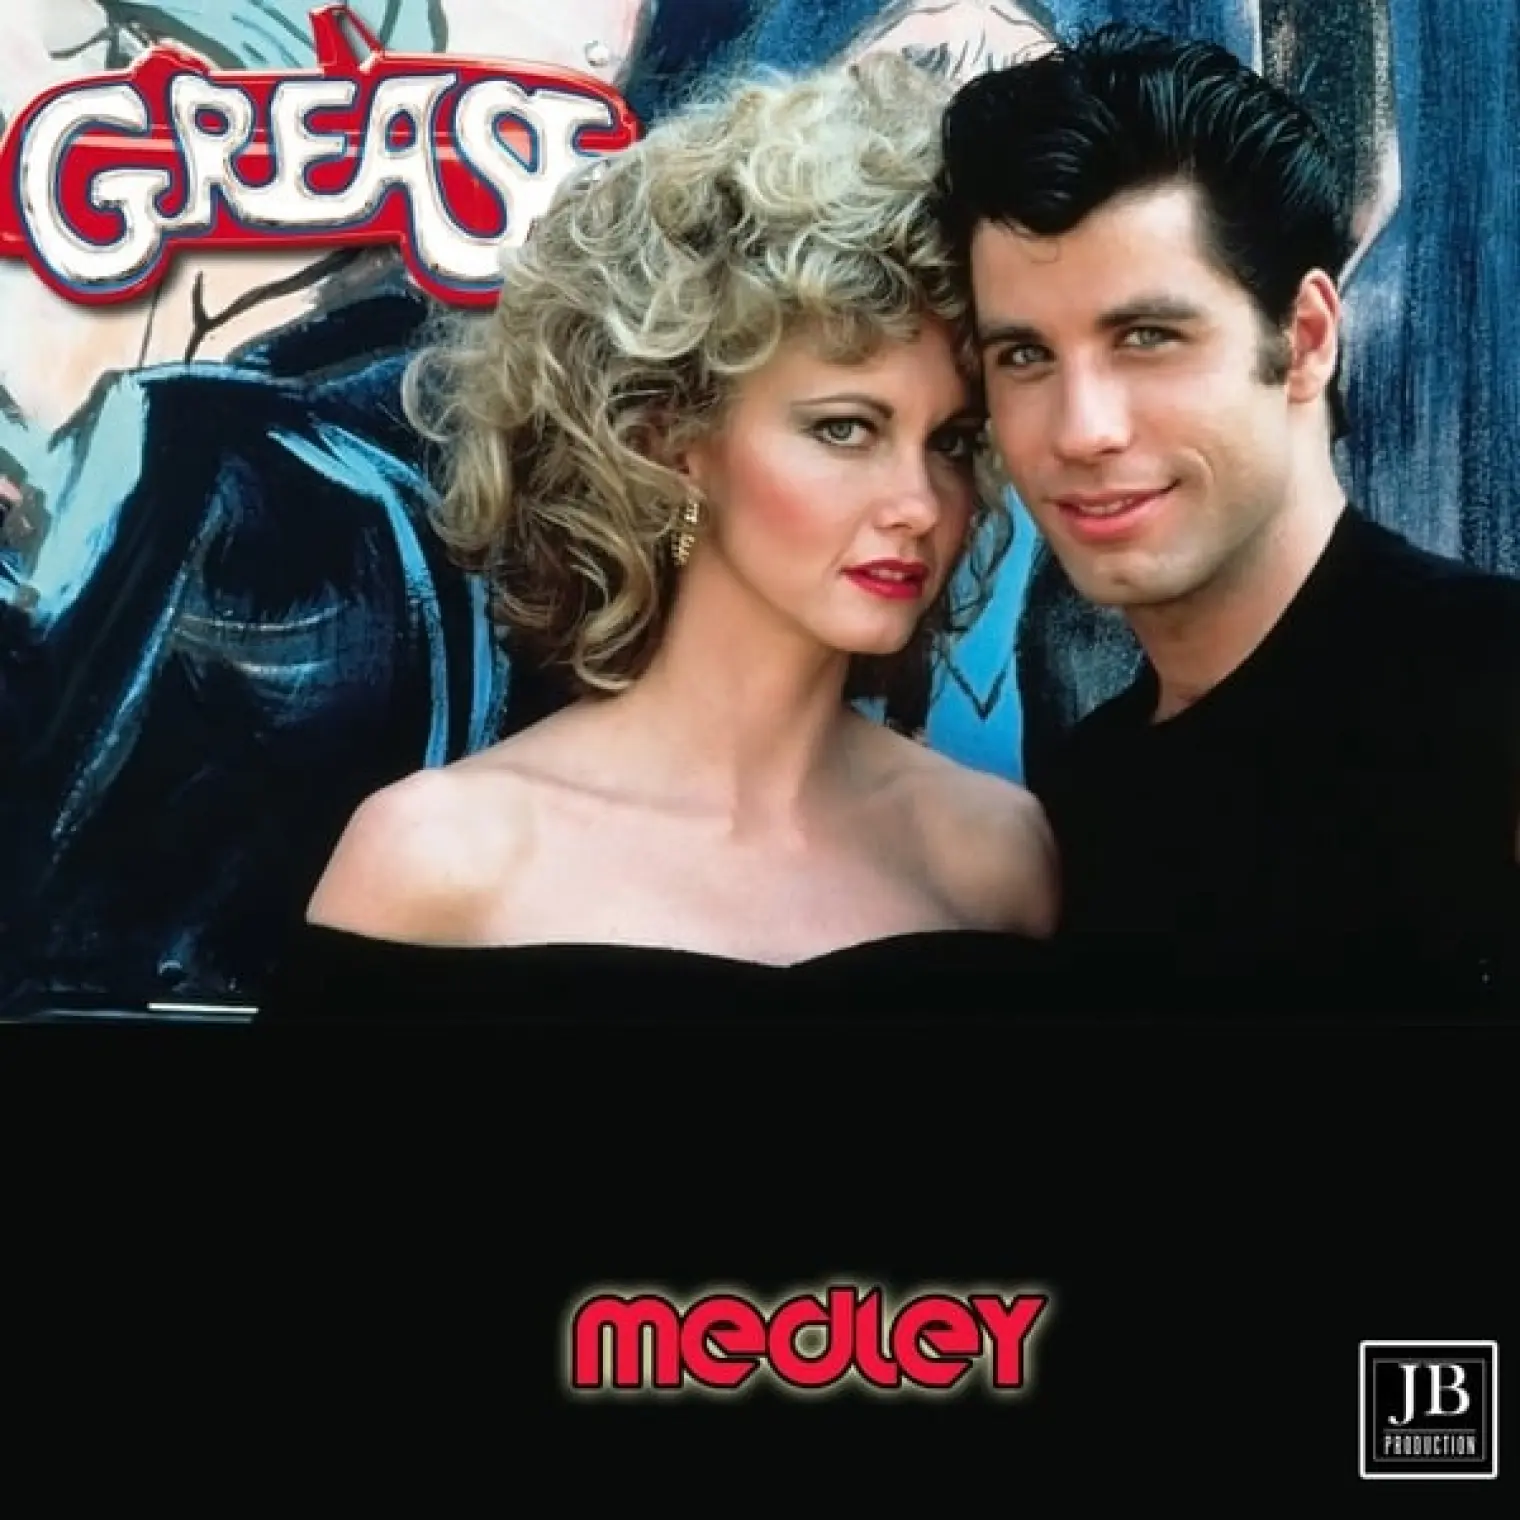 Grease Medley: Grease / Summer Nights / Hopelessly Devoted to You / You're the One That I Want / Sandy / Beauty School Dropout / Look at Me, I'm Sandra Dee / Greased Lightning / It's Raining on Prom Night / Alona at the Drive-In-Movie / Blue Moon -  Silver 